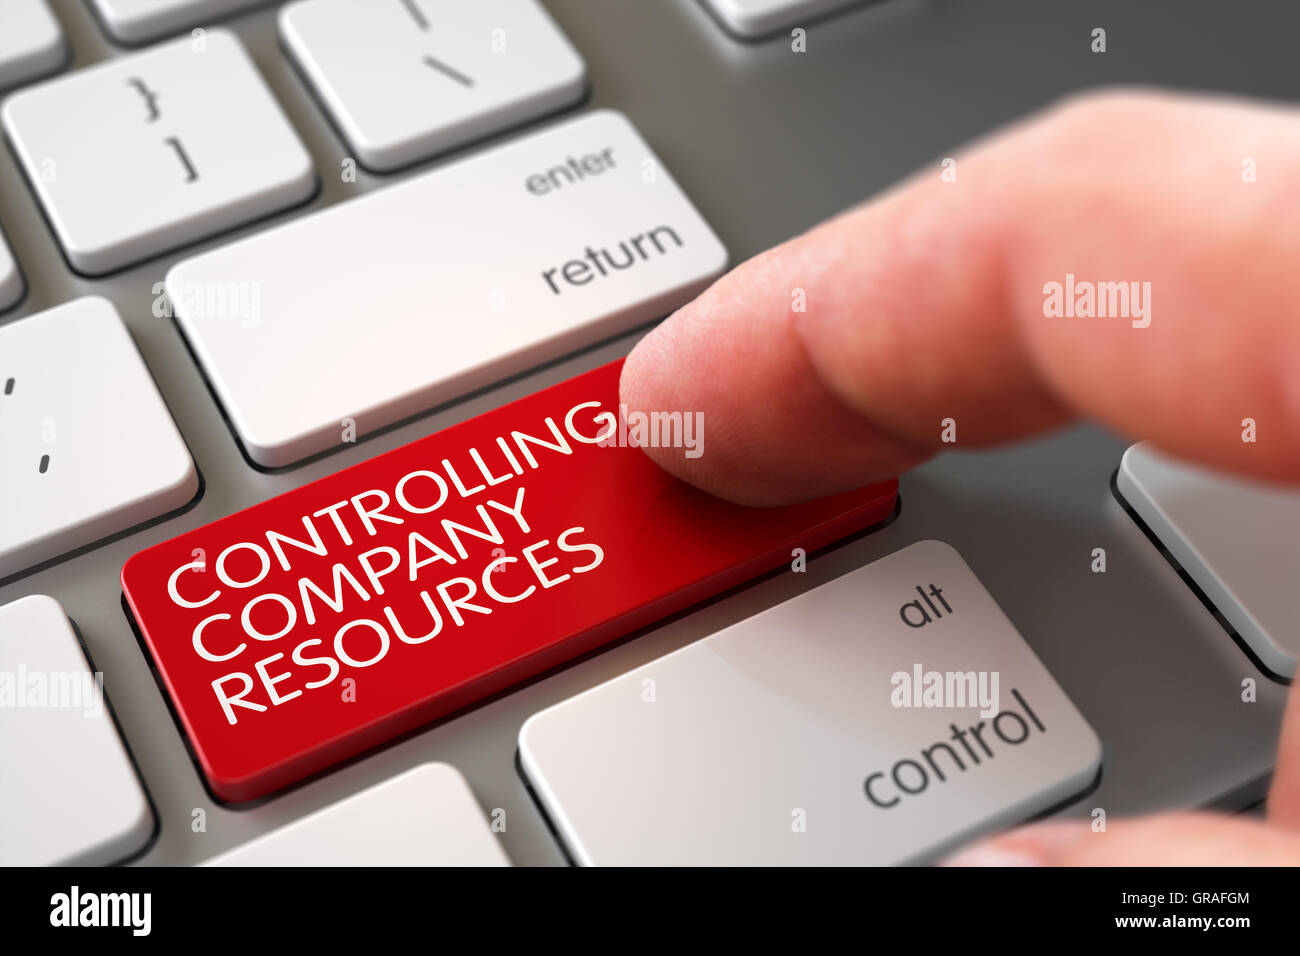 Controlling Company Resources Laptop Keyboard Concept 3d